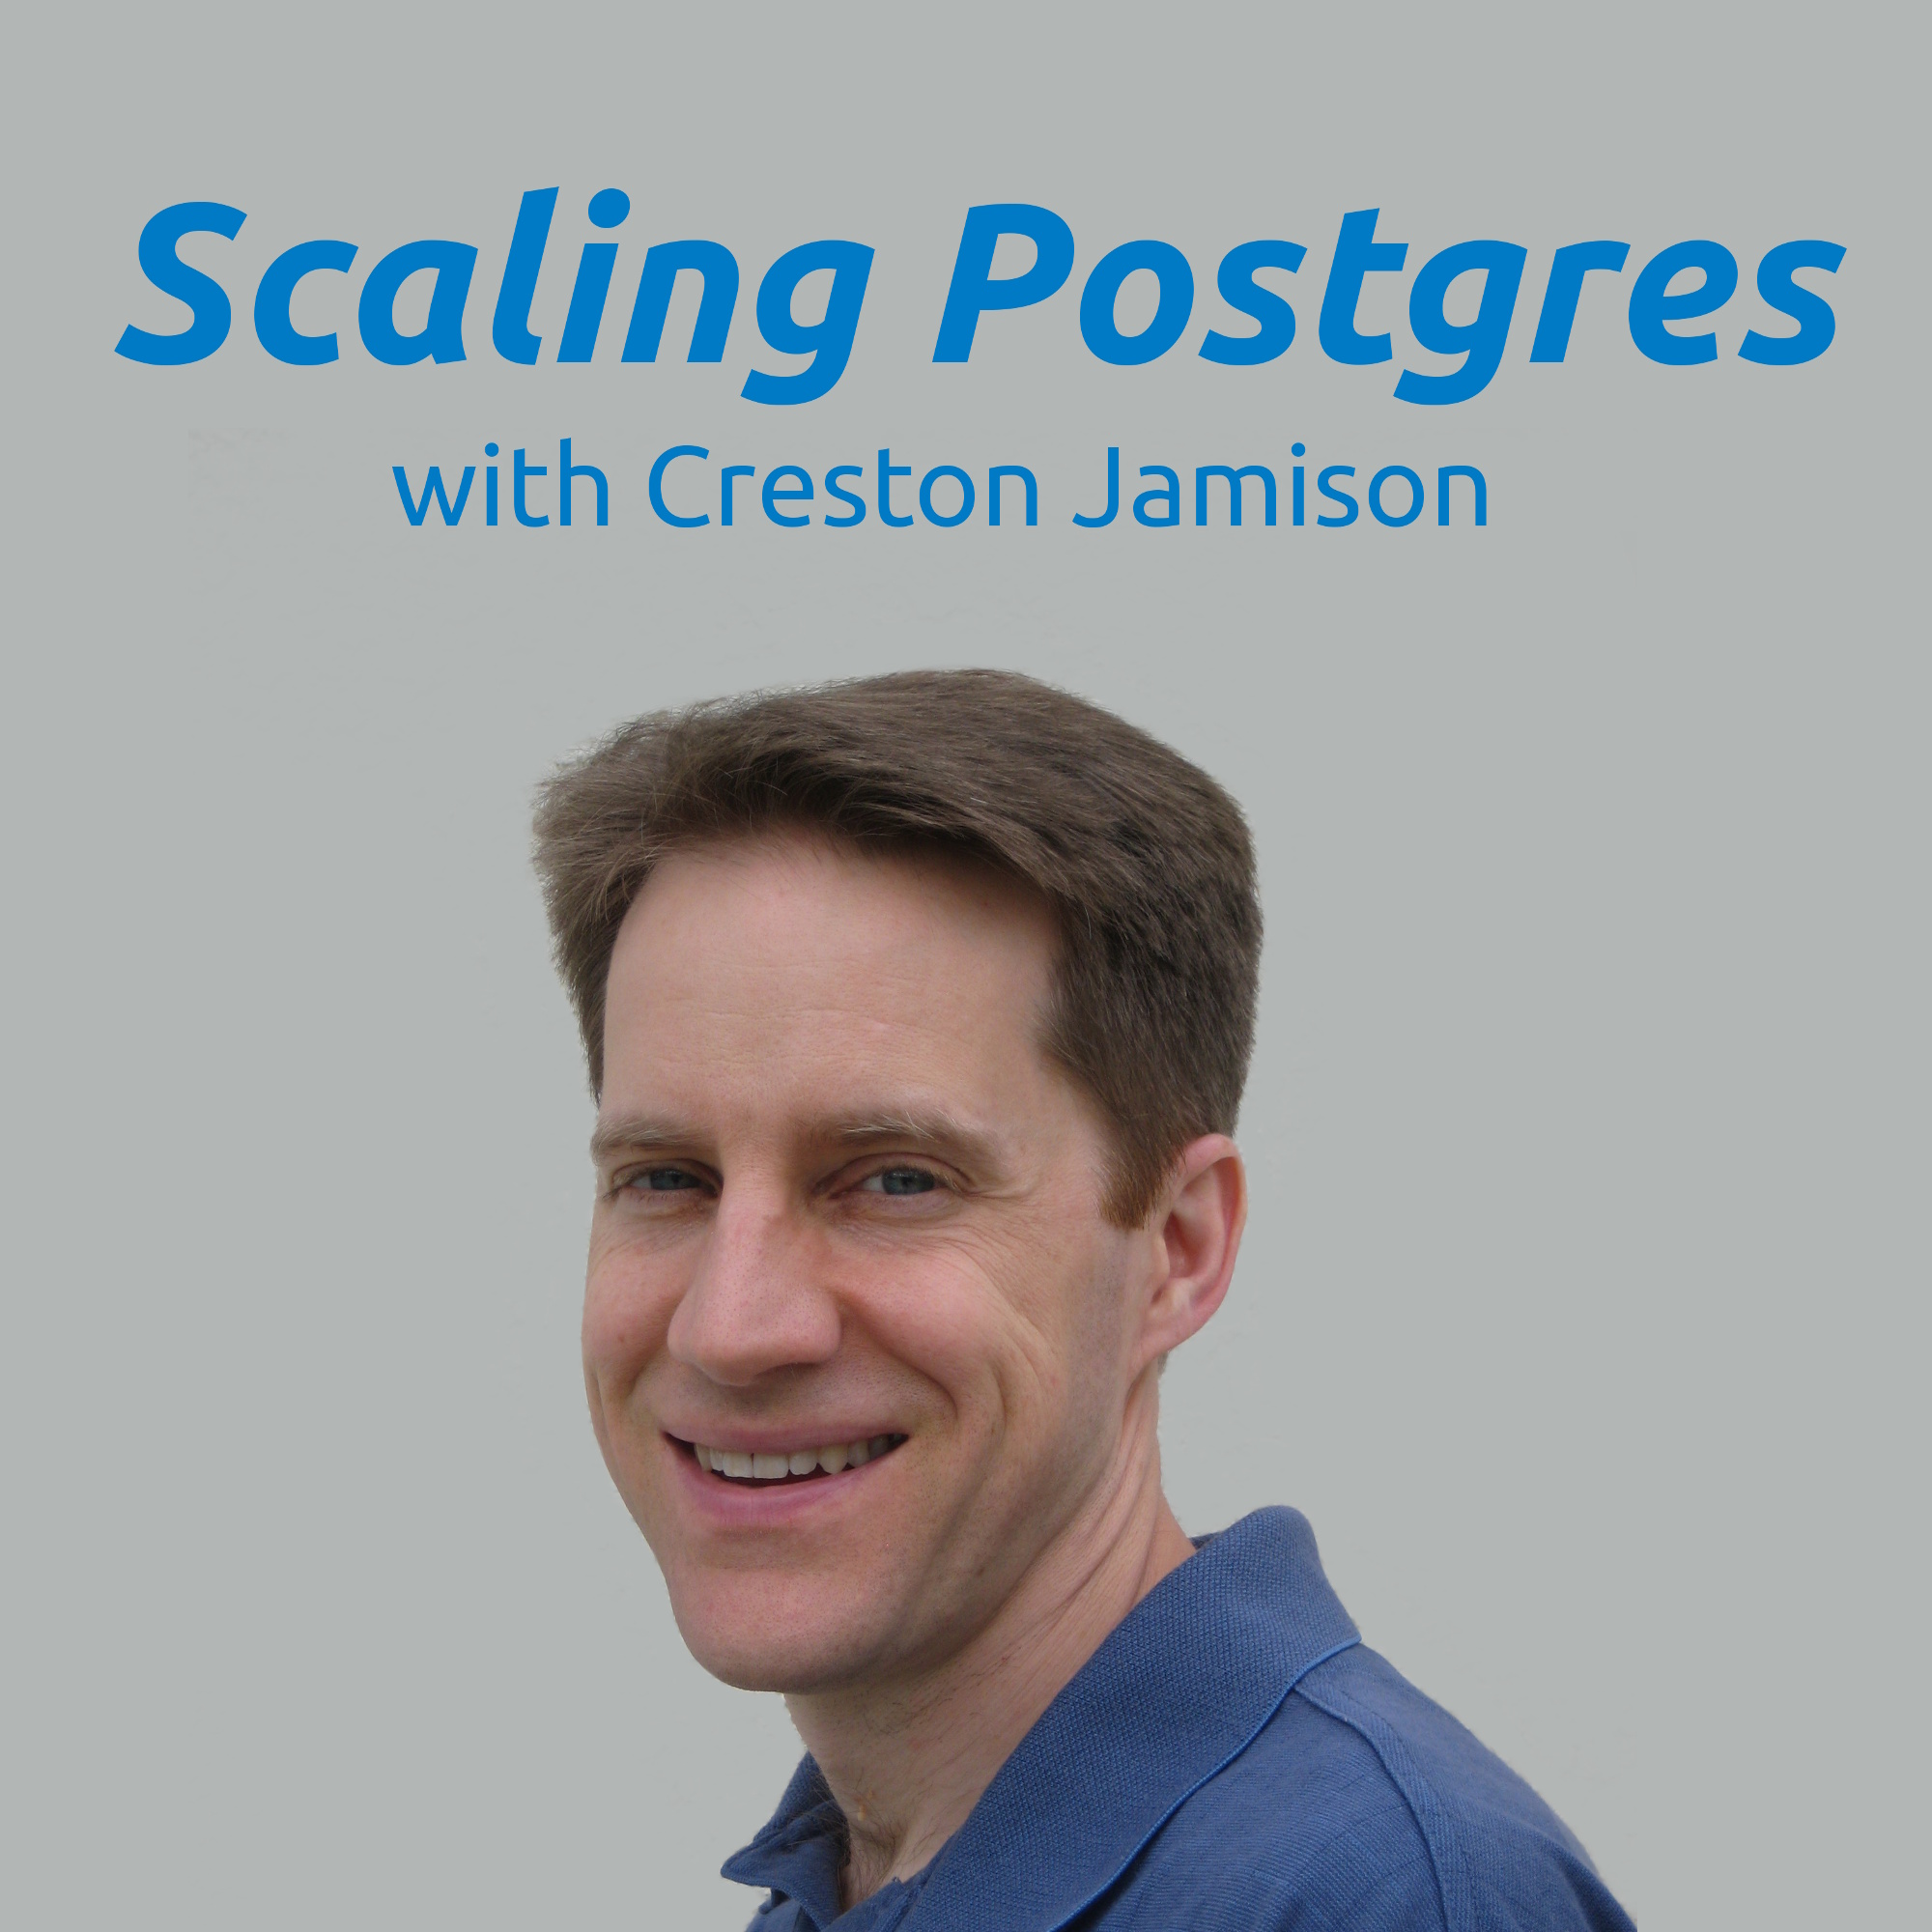 Sharding, Federation, Linux HugePages, Performance Tuning | Scaling Postgres 187